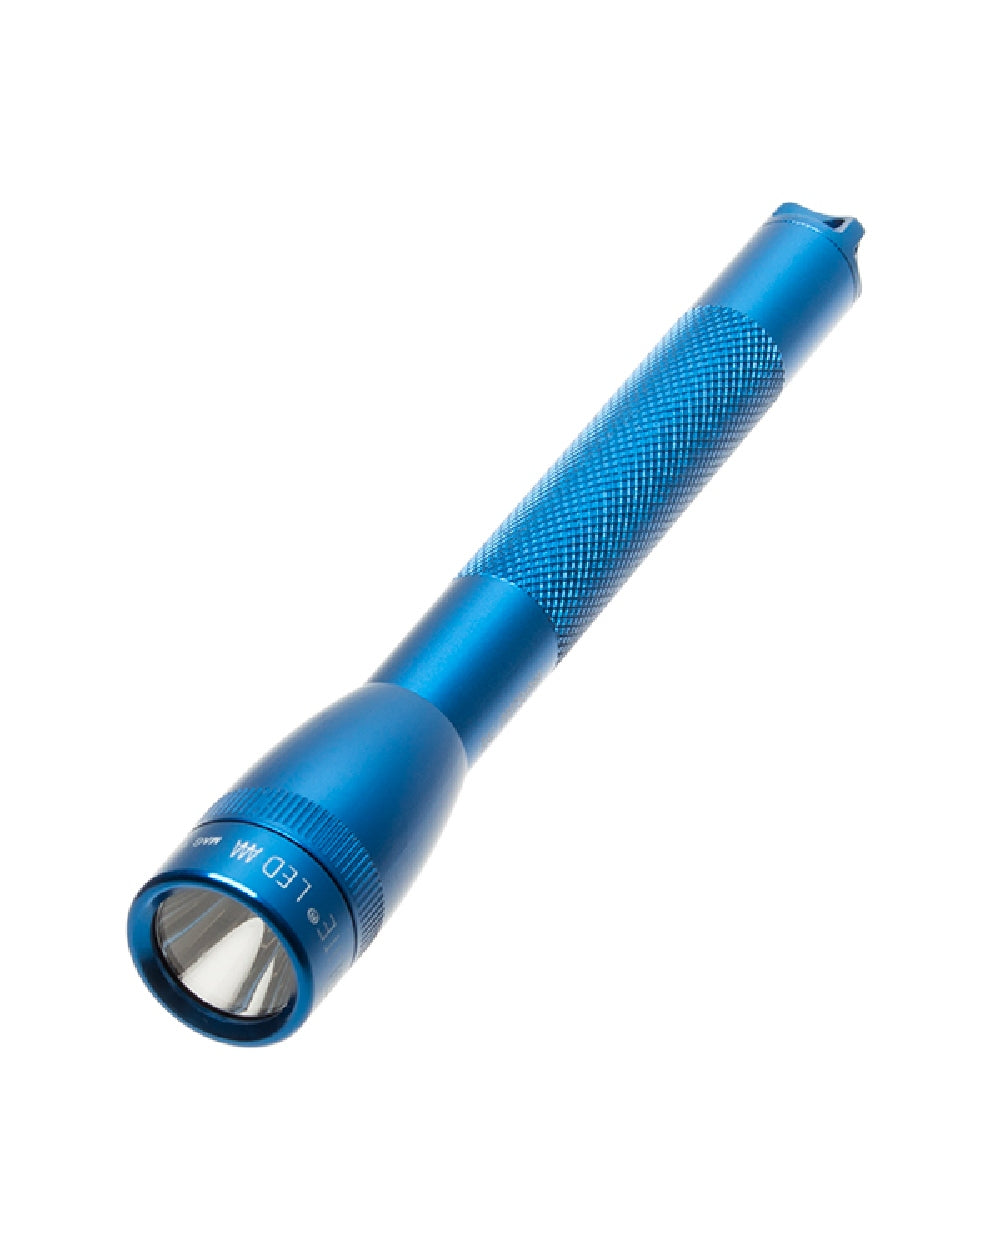 Maglite Mini 2-Cell AAA LED Torch in Blue 